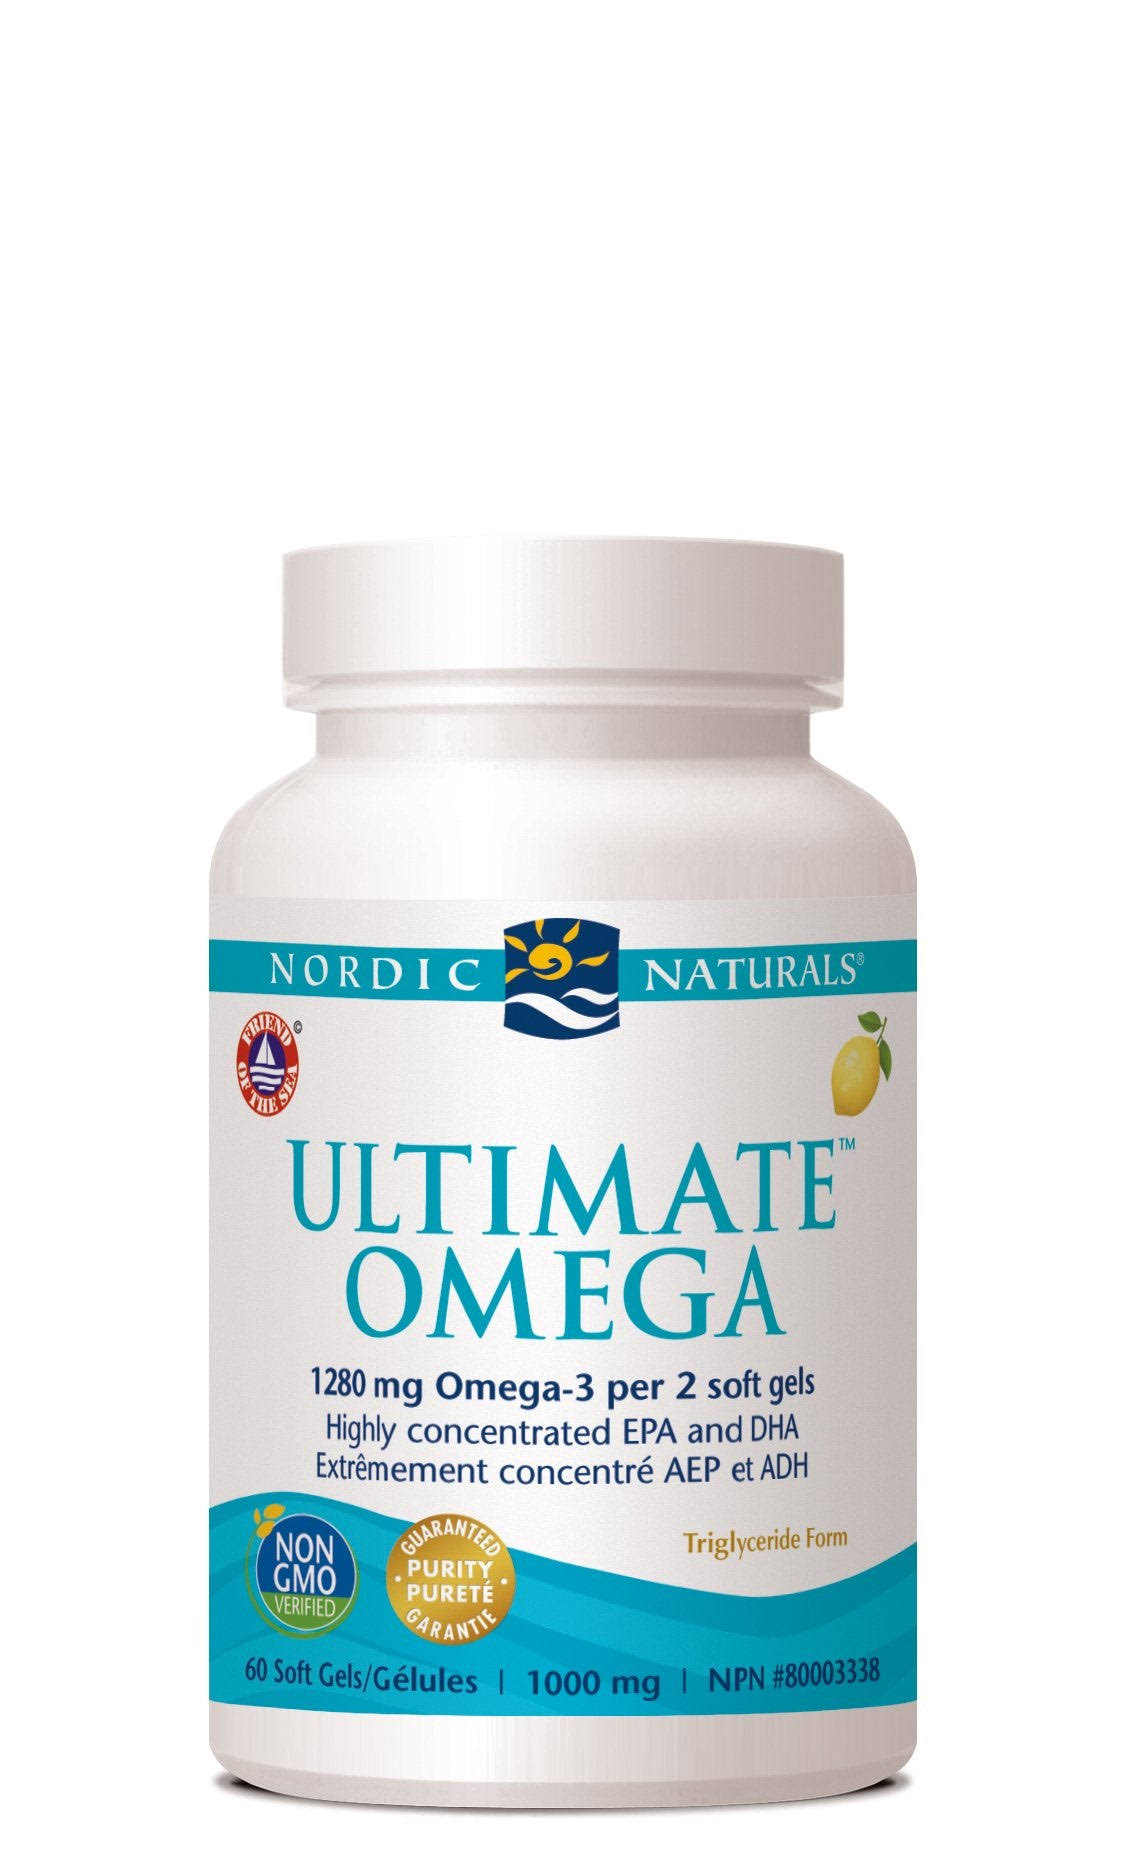 Nordic Naturals Ultimate Omega Dietary Supplement - 120ct